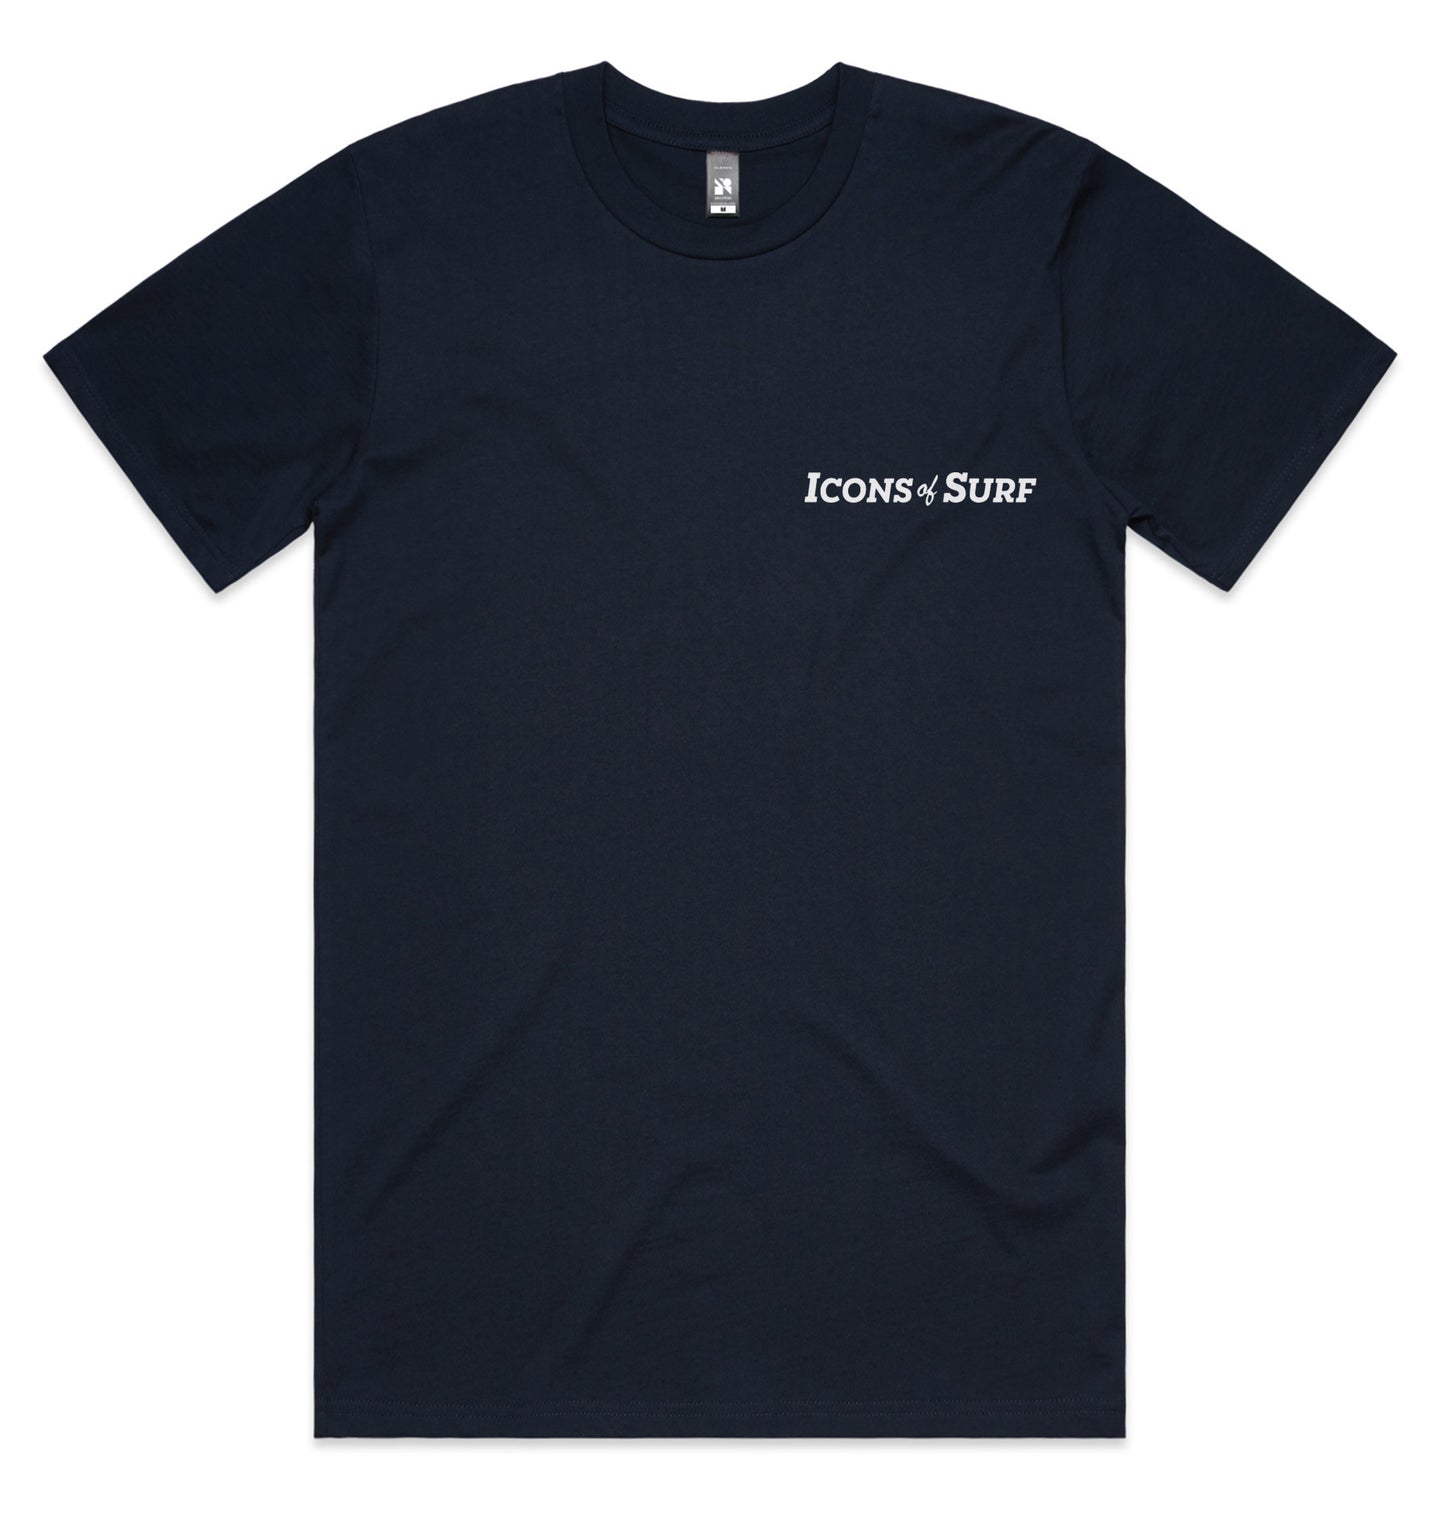 Icons T-Shirt | Icons Store (Navy)